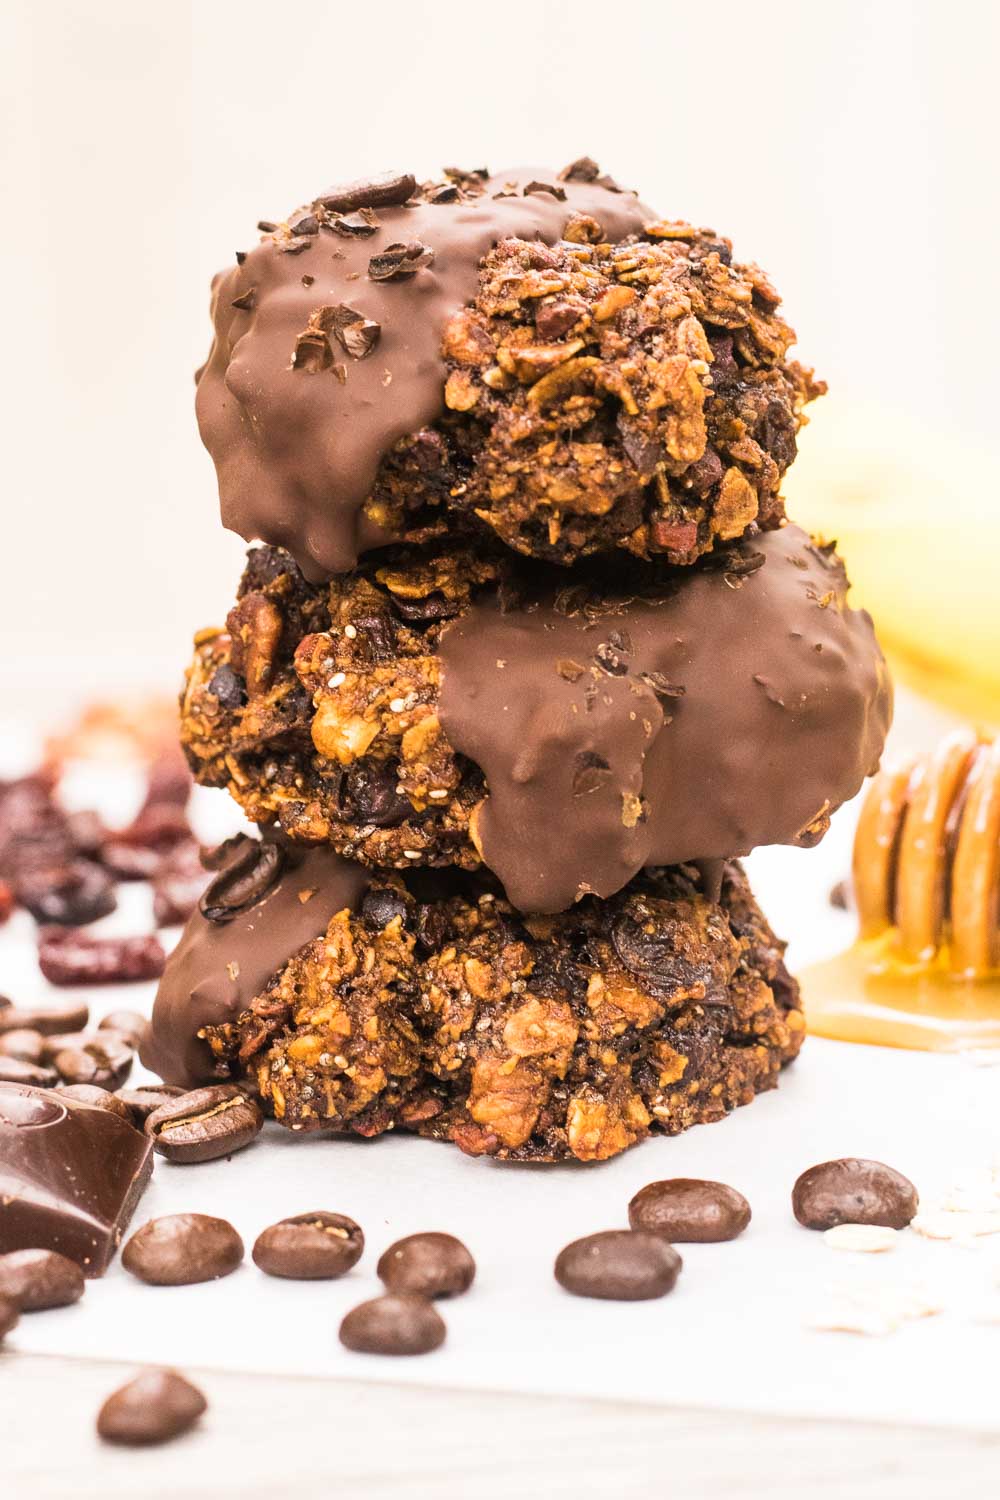 Kickstart mornings with super-caffeinated cookies! These rich cookies are vegan, gluten-free, & naturally sweetened for indulgent-but-healthy quick breakfasts.